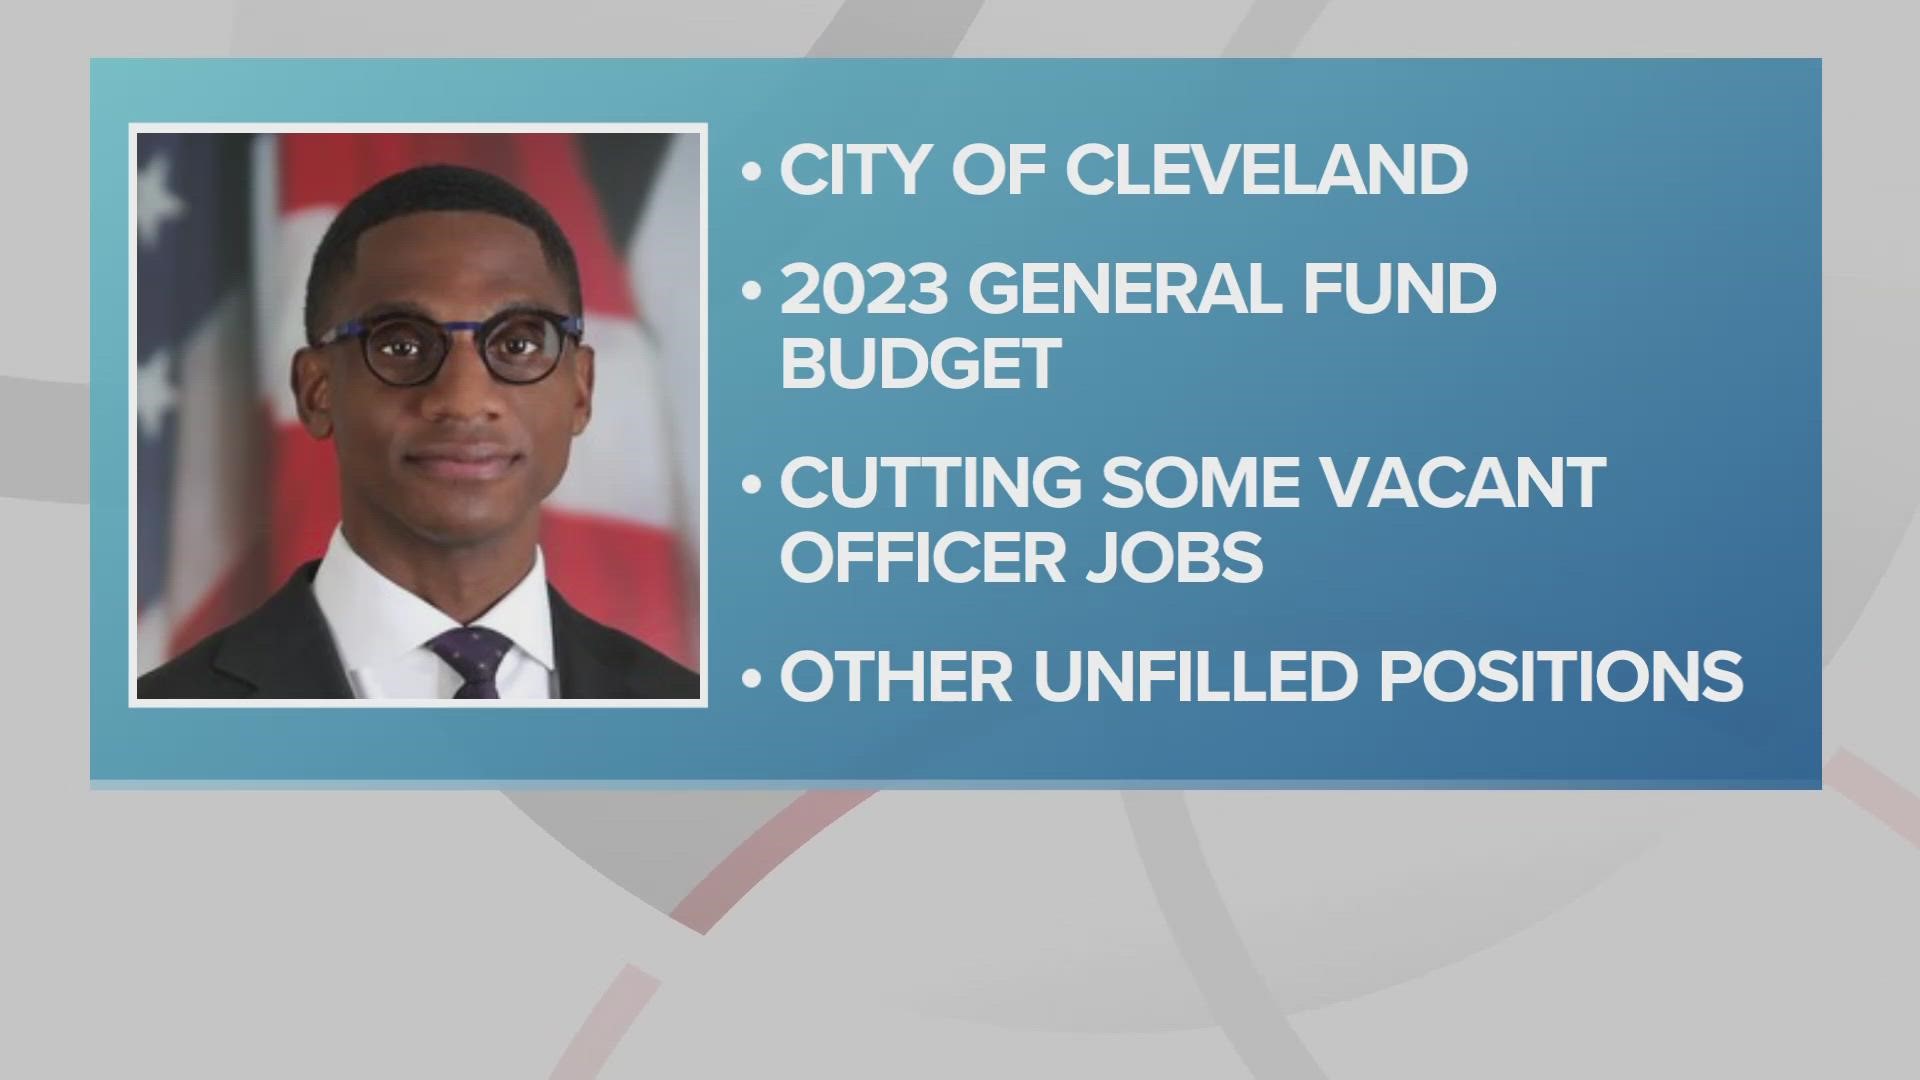 Bibb's $1.9 billion budget proposal features $711 million in General Fund spending. More than 250 unfilled city positions would be eliminated.